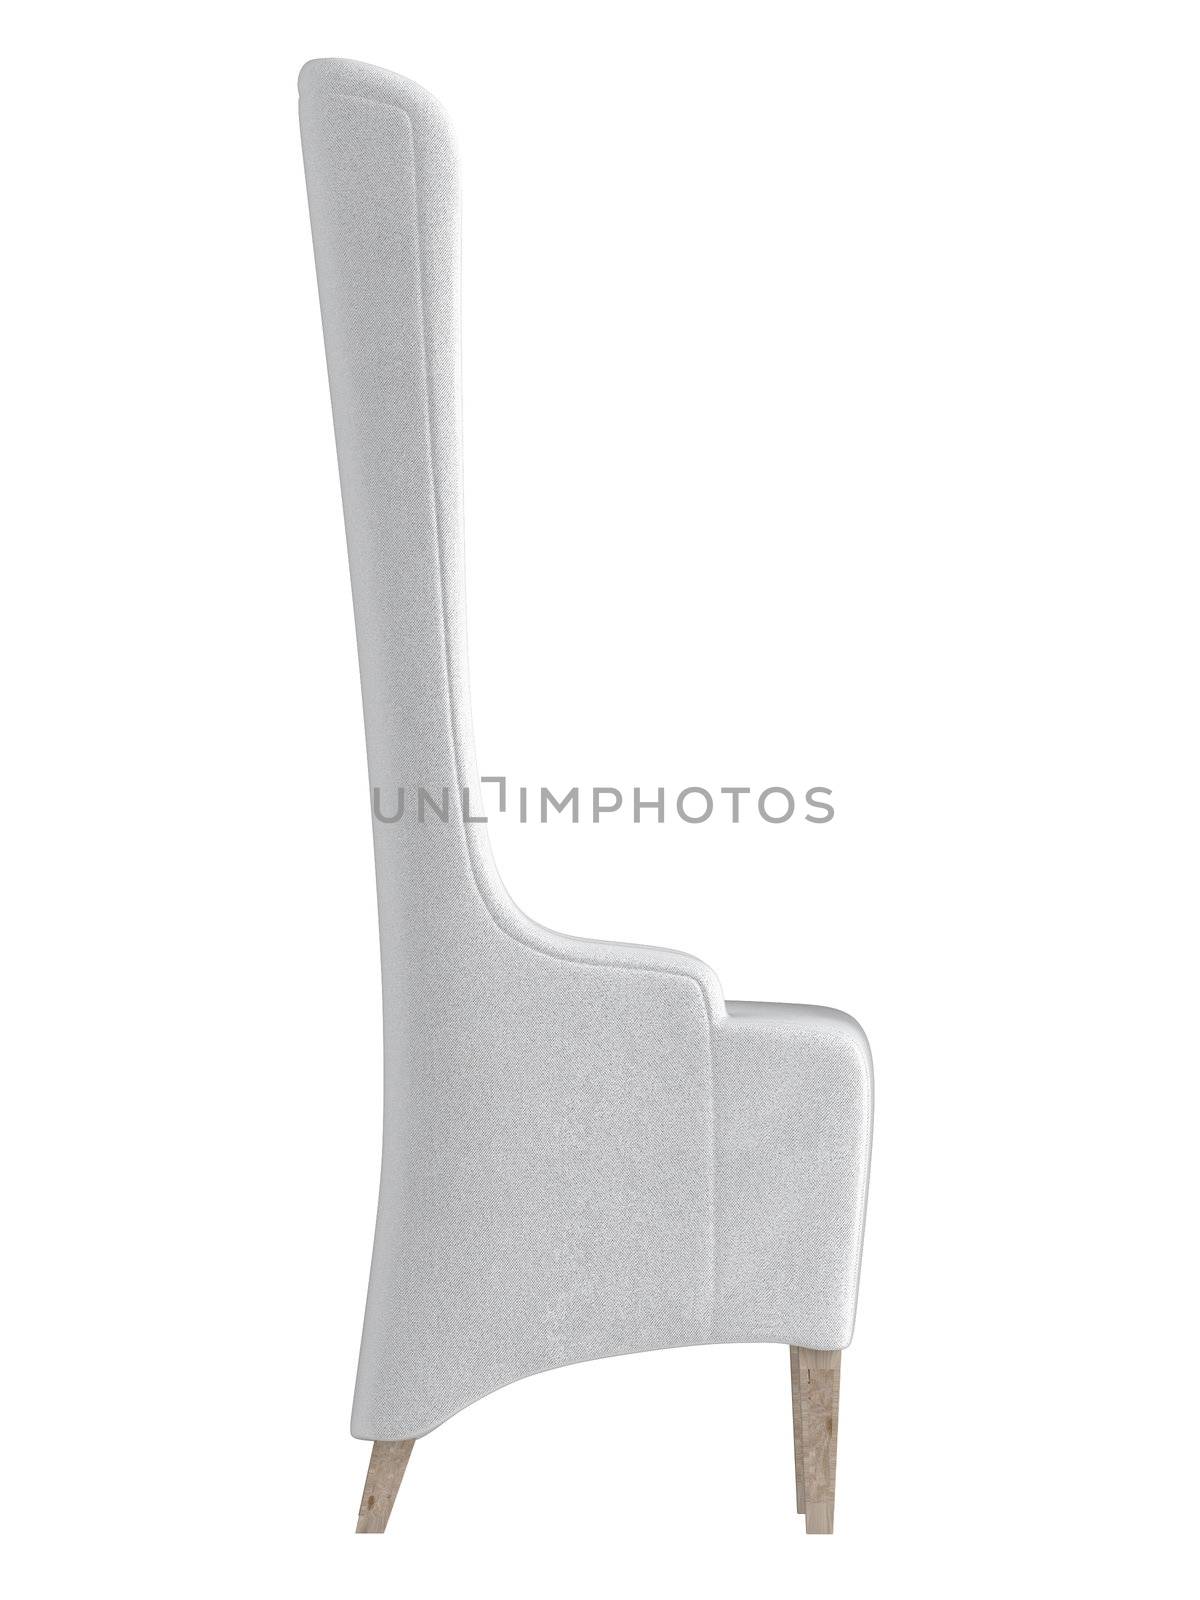 Modern design high backed upholstered armchair isolated on white to insert in your indoor decor